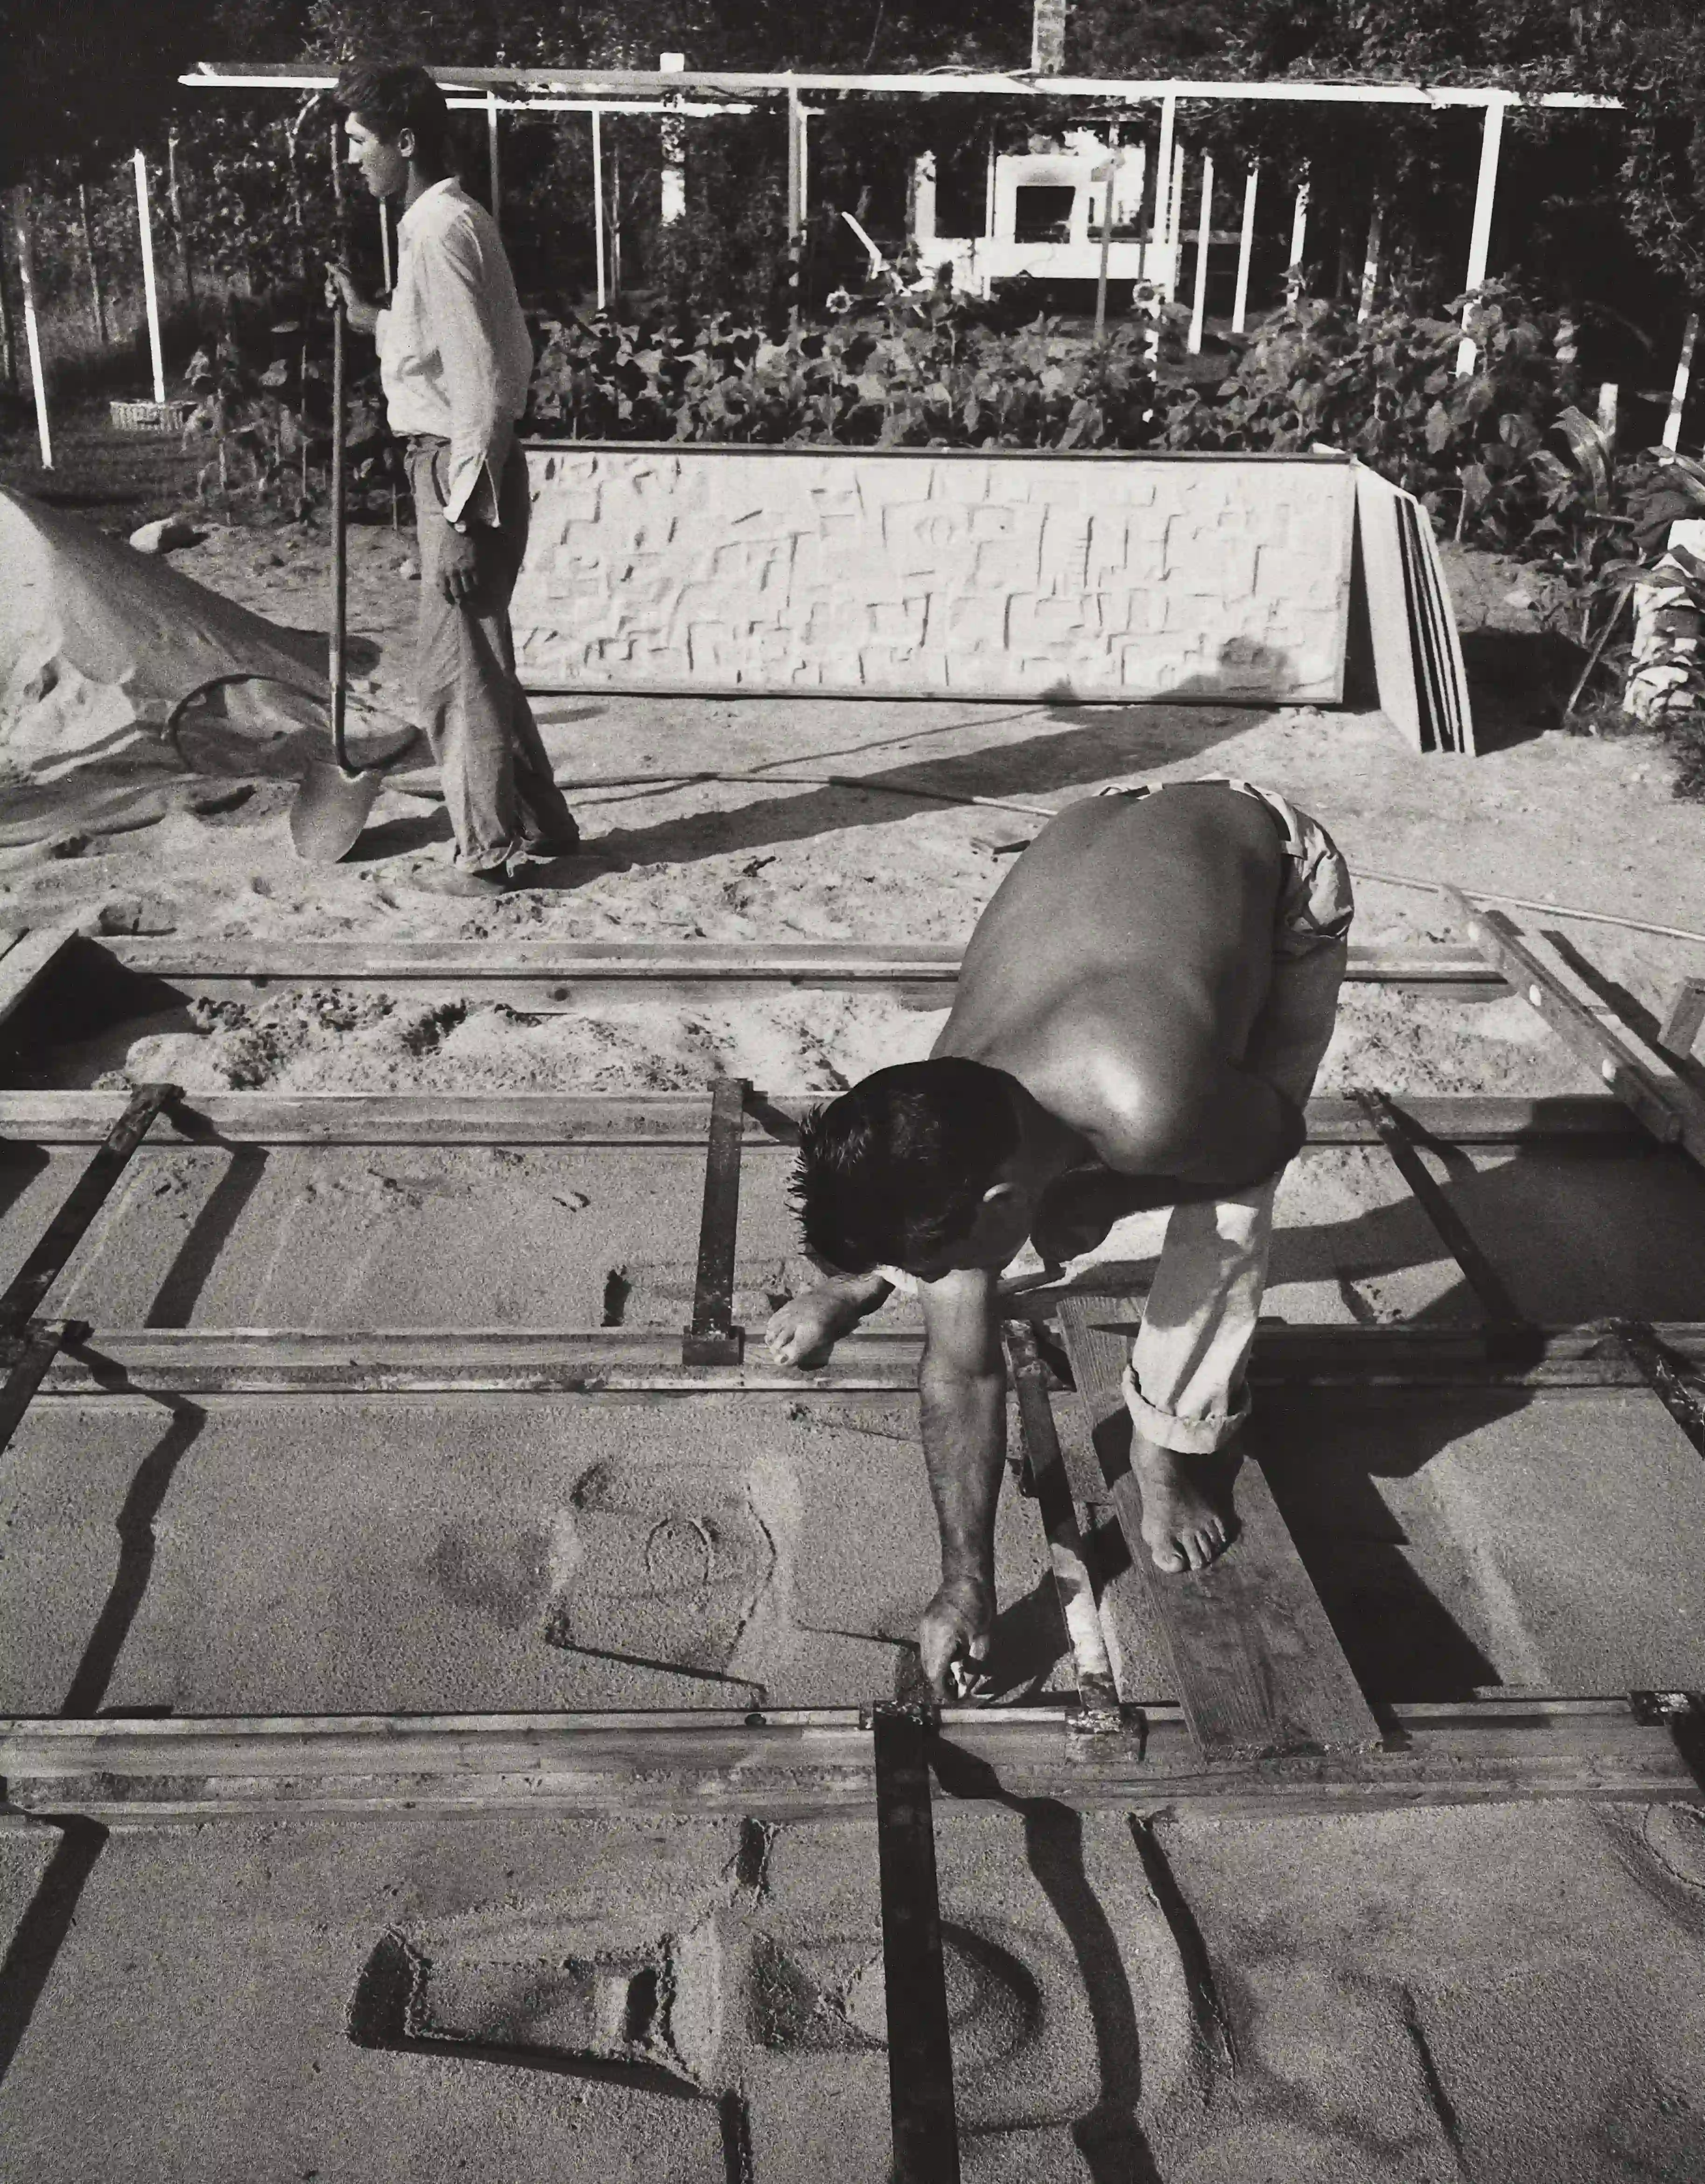 The artist Constantino Nivola, foreground, creating a sculptural relief by using a sand-casting method in 1957.